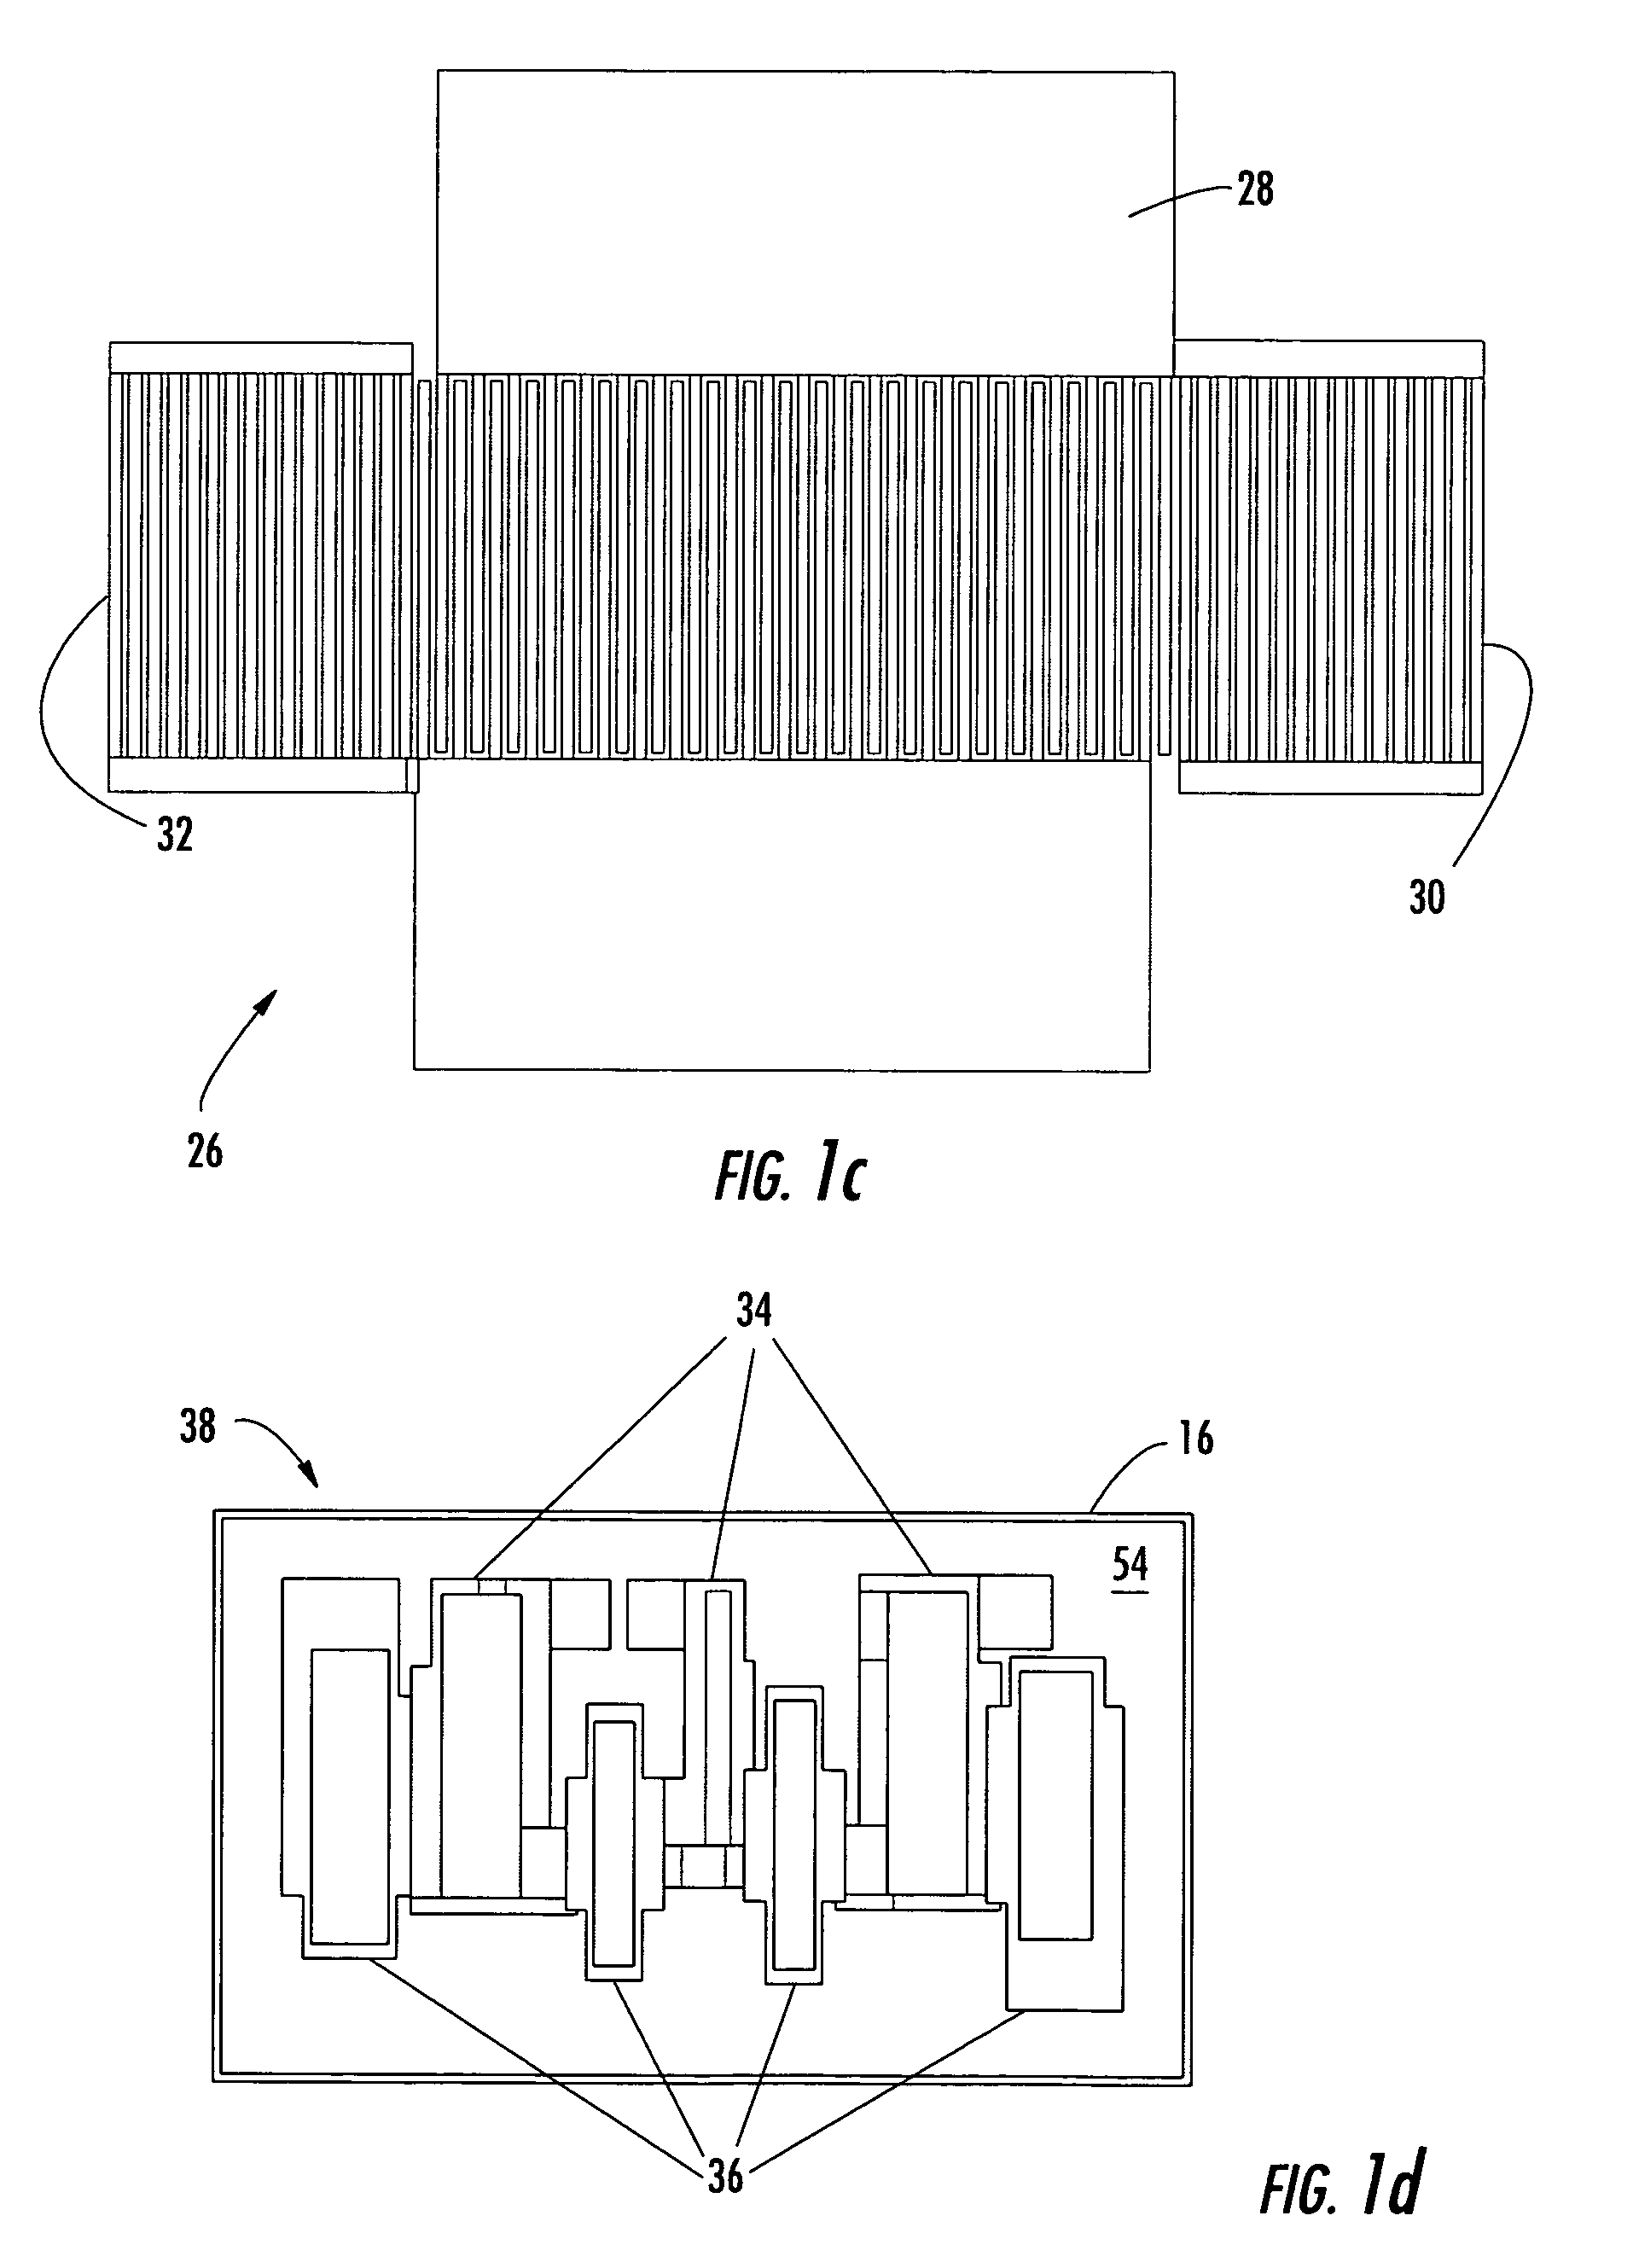 Saw filter device and method employing normal temperature bonding for producing desirable filter production and performance characteristics